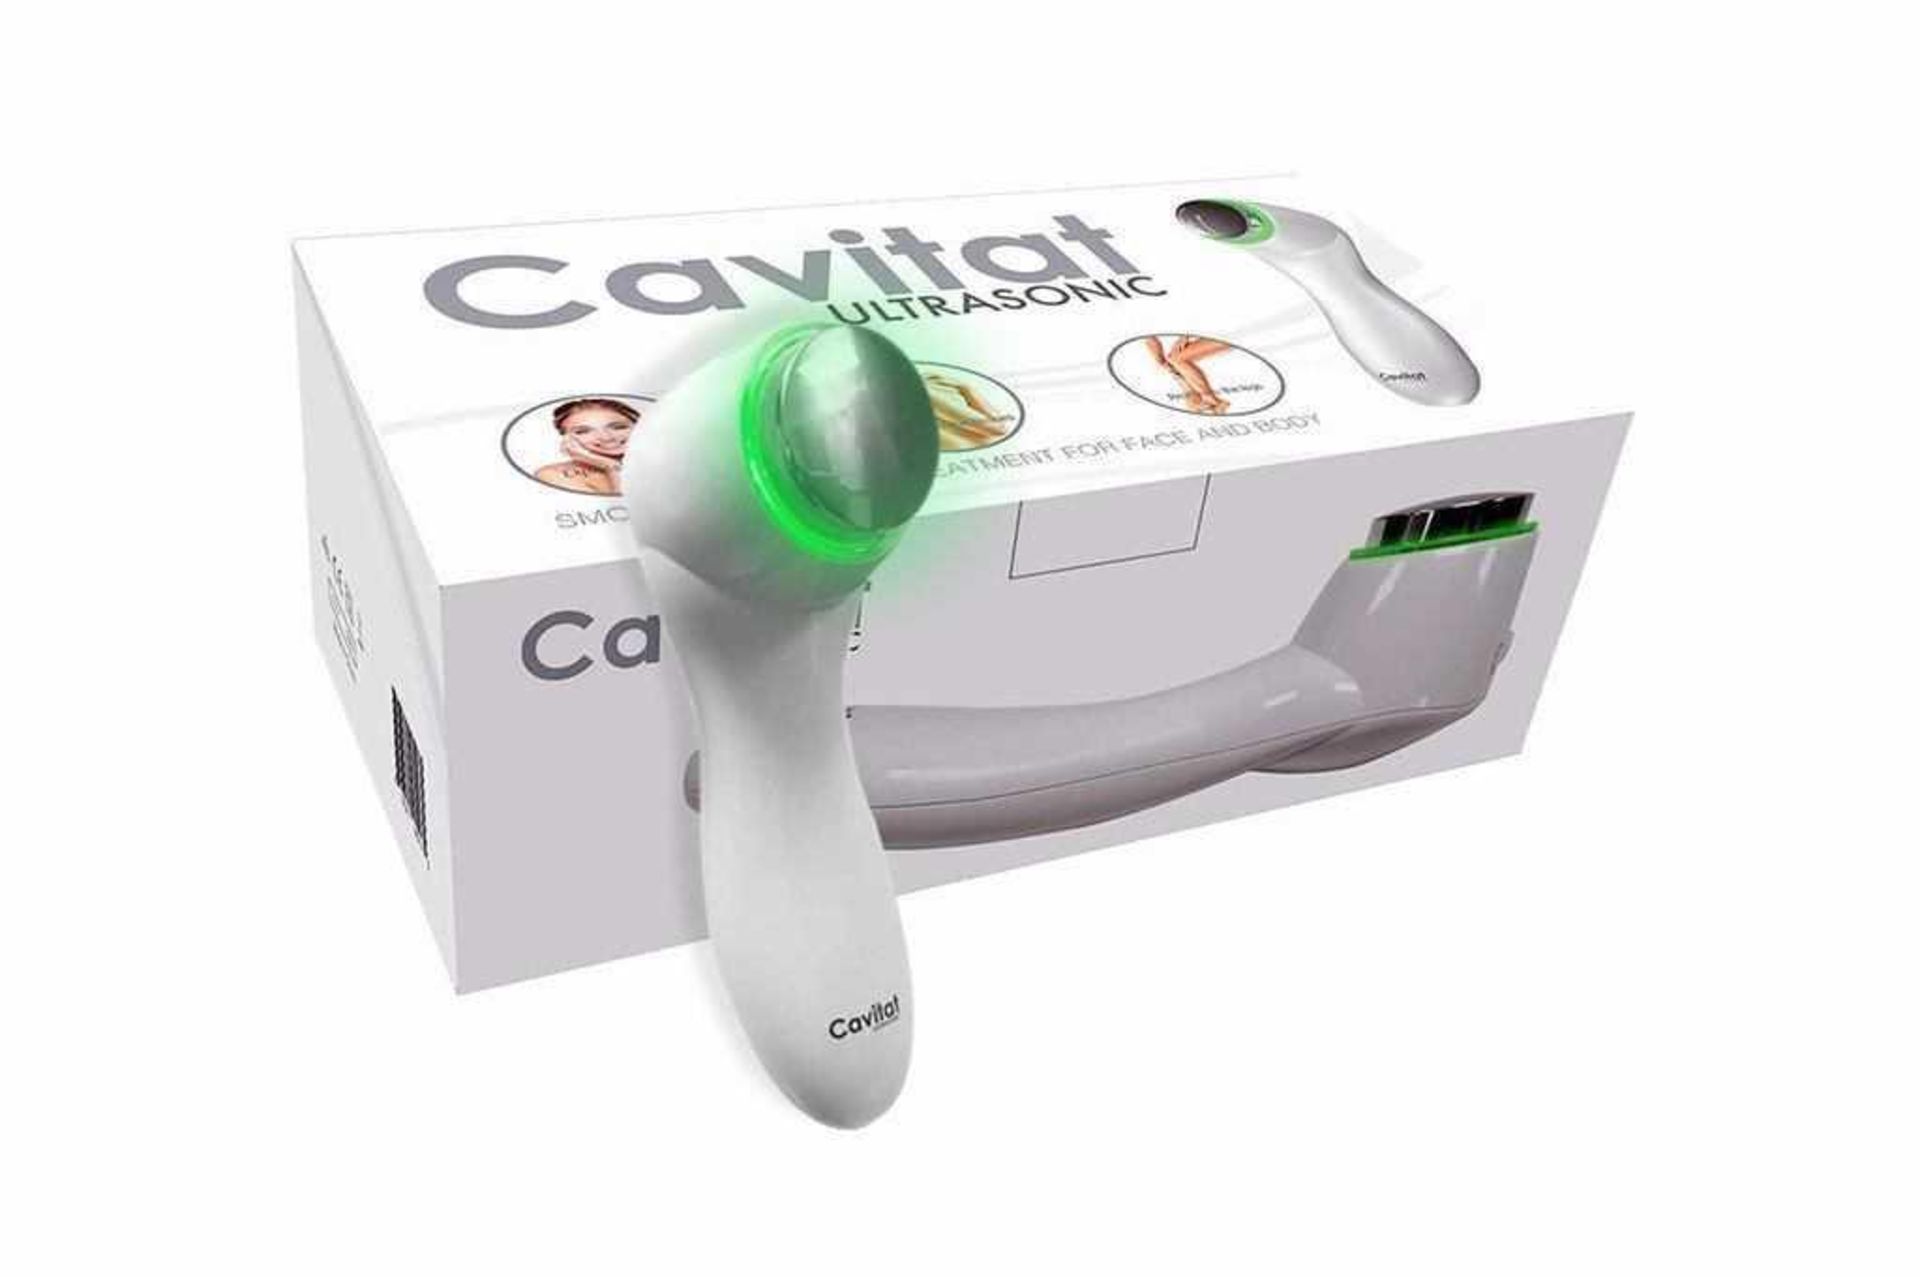 RRP £180 Lot To Contain 2 Brand New Boxed Cavitat Ultrasonic Smoothing Beauty Treatments For Face An